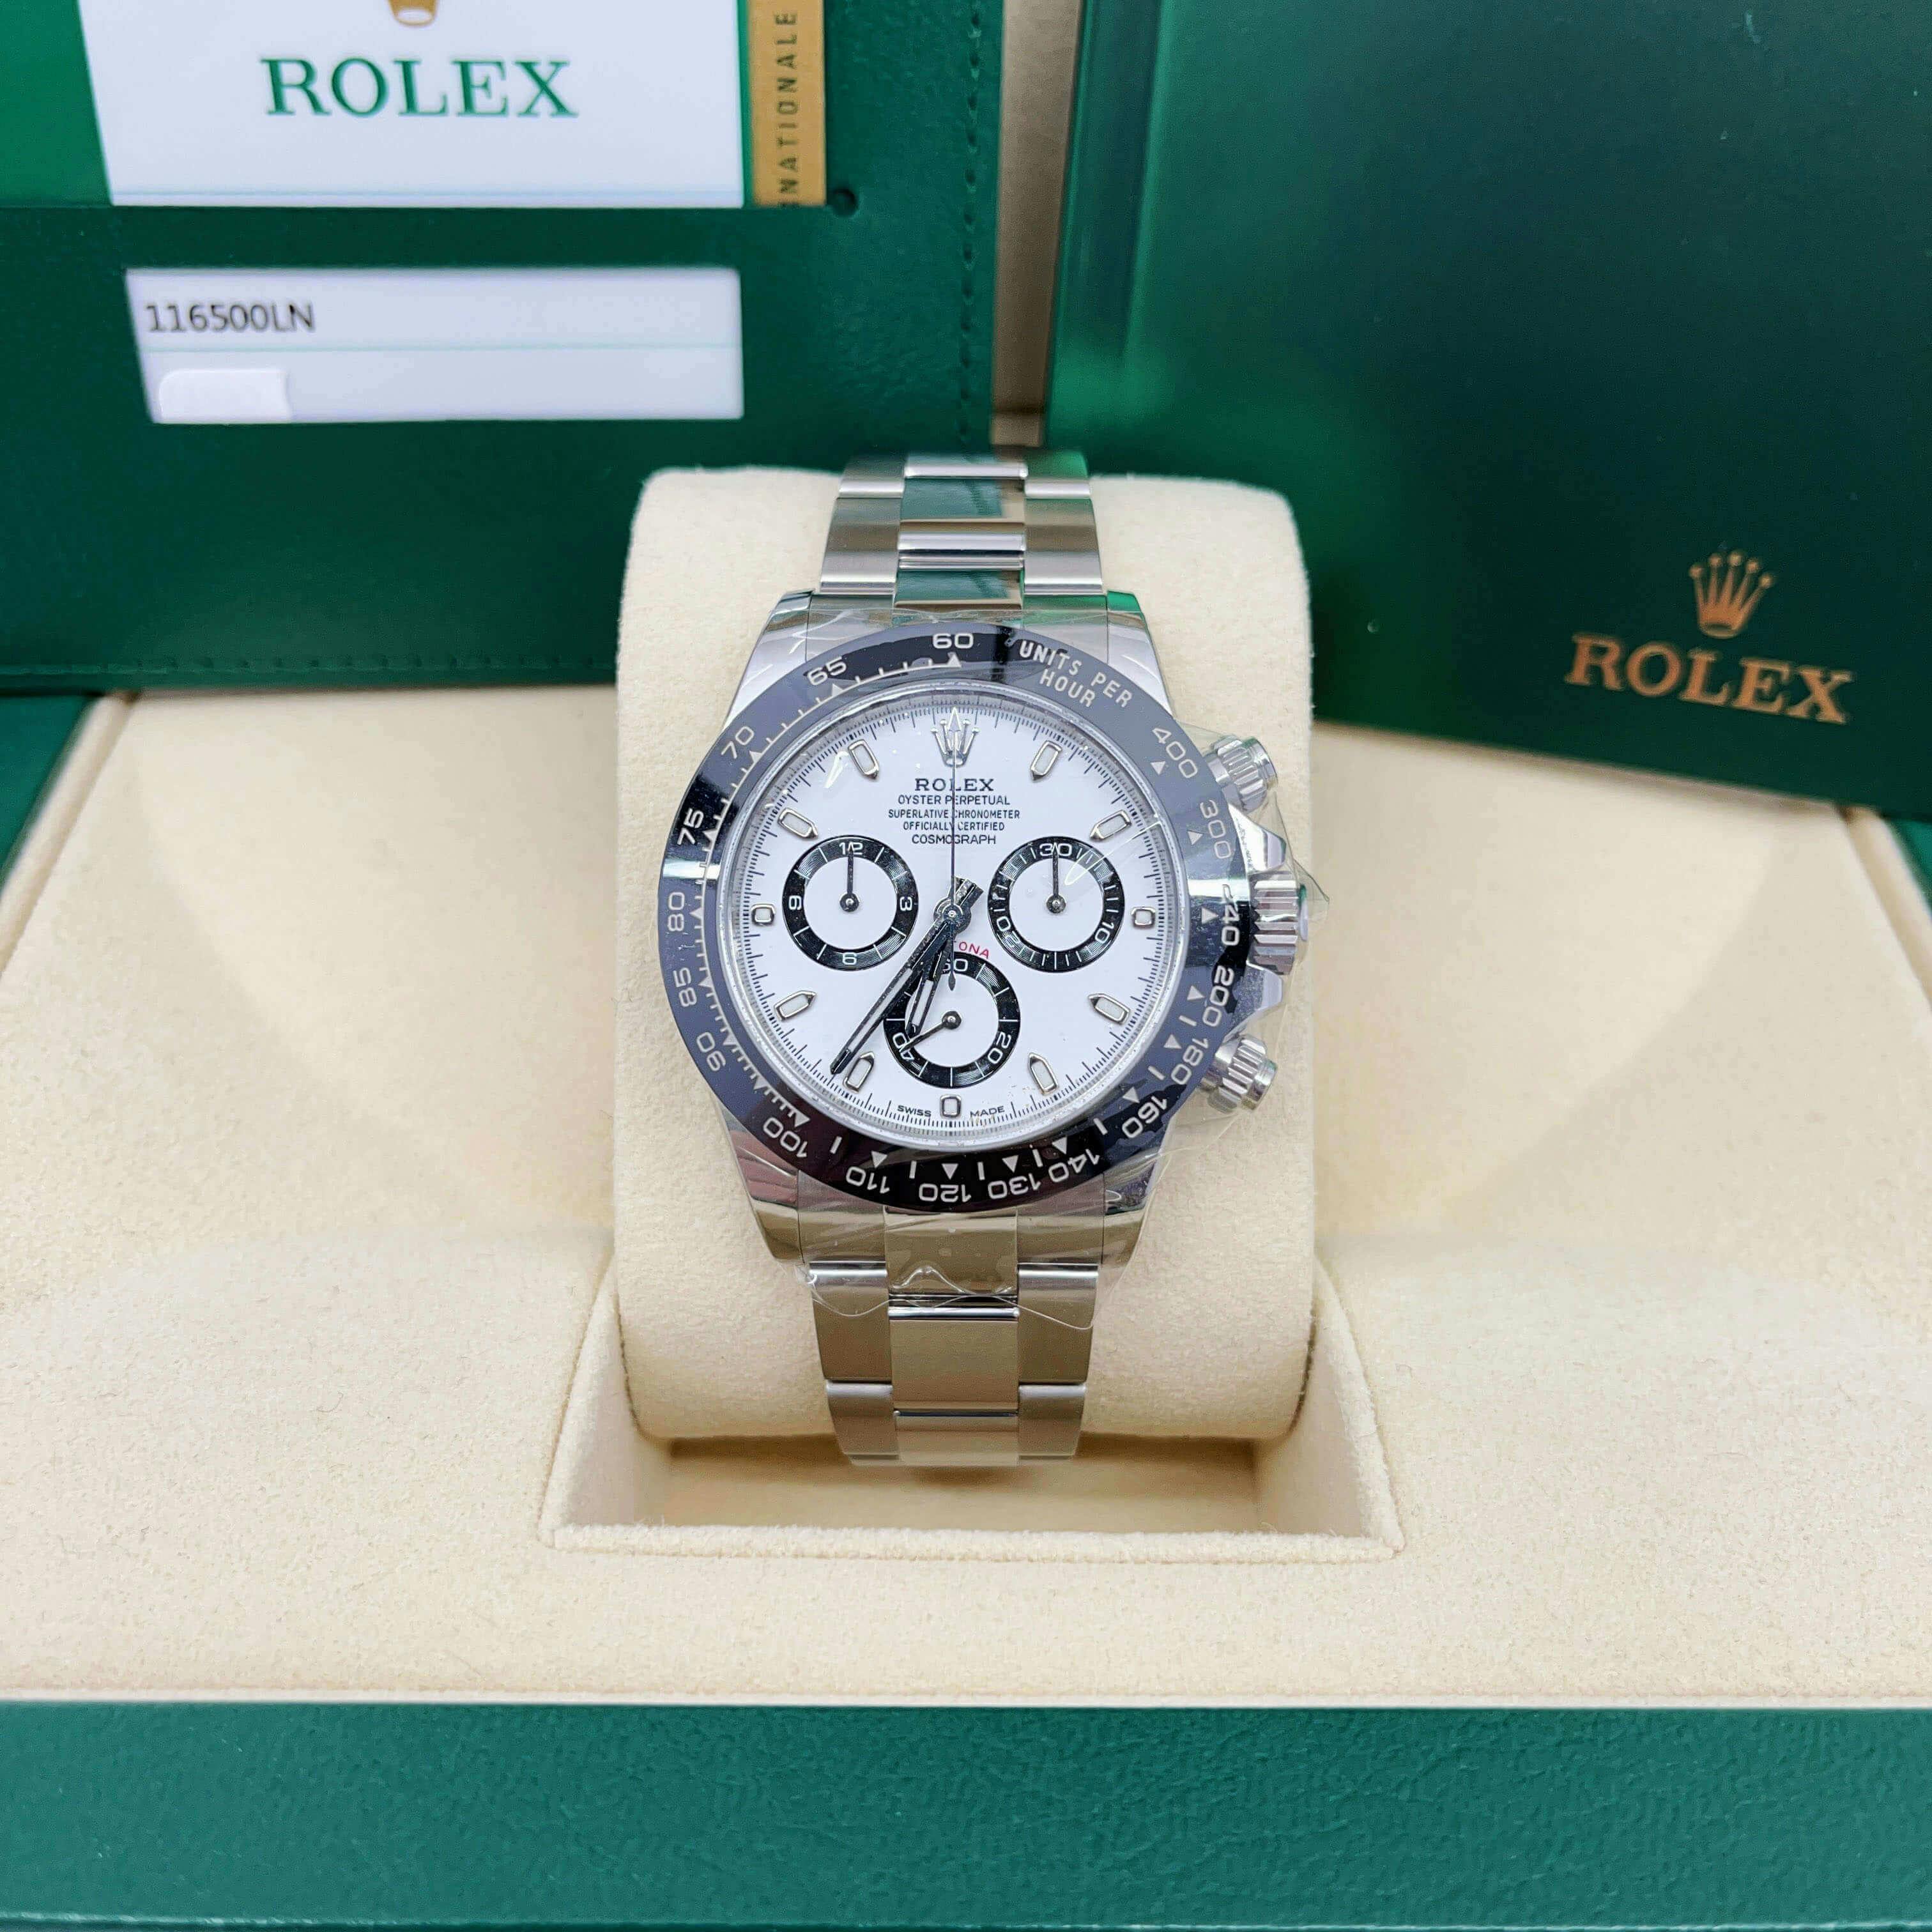 Rolex 116500LN Cosmograph Daytona with White Face Excellent 